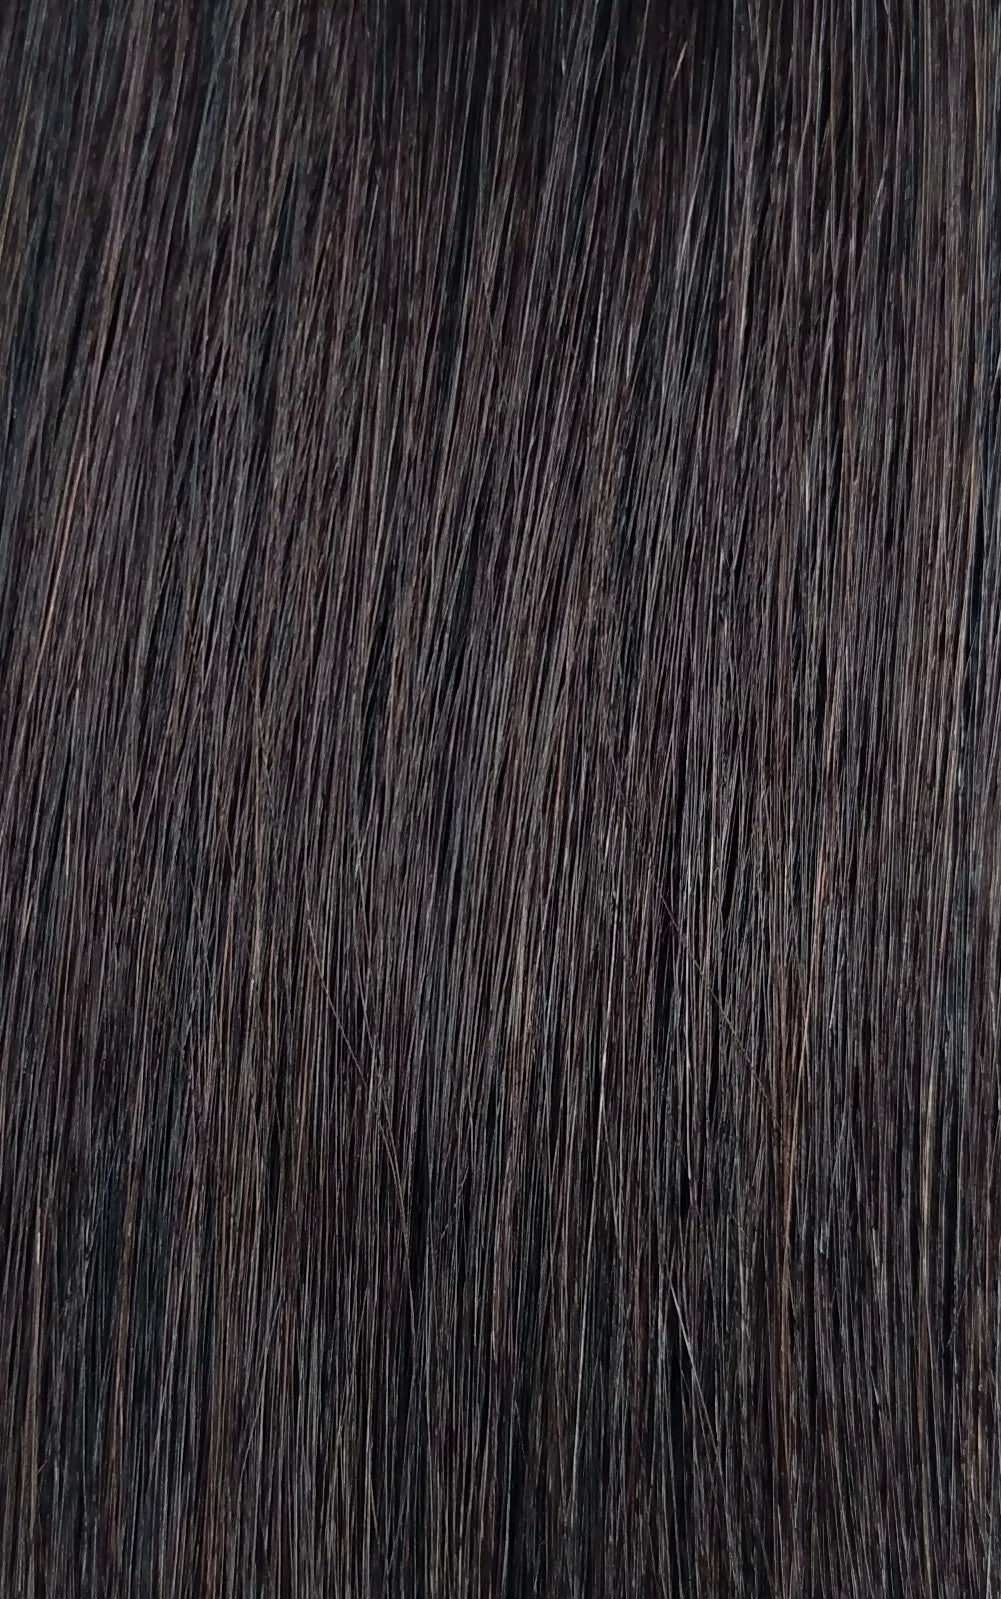 Close up image of LUSHIERE clip in hair extensions in very dark brown colour #2d Deep Dark Brown taken in natural light